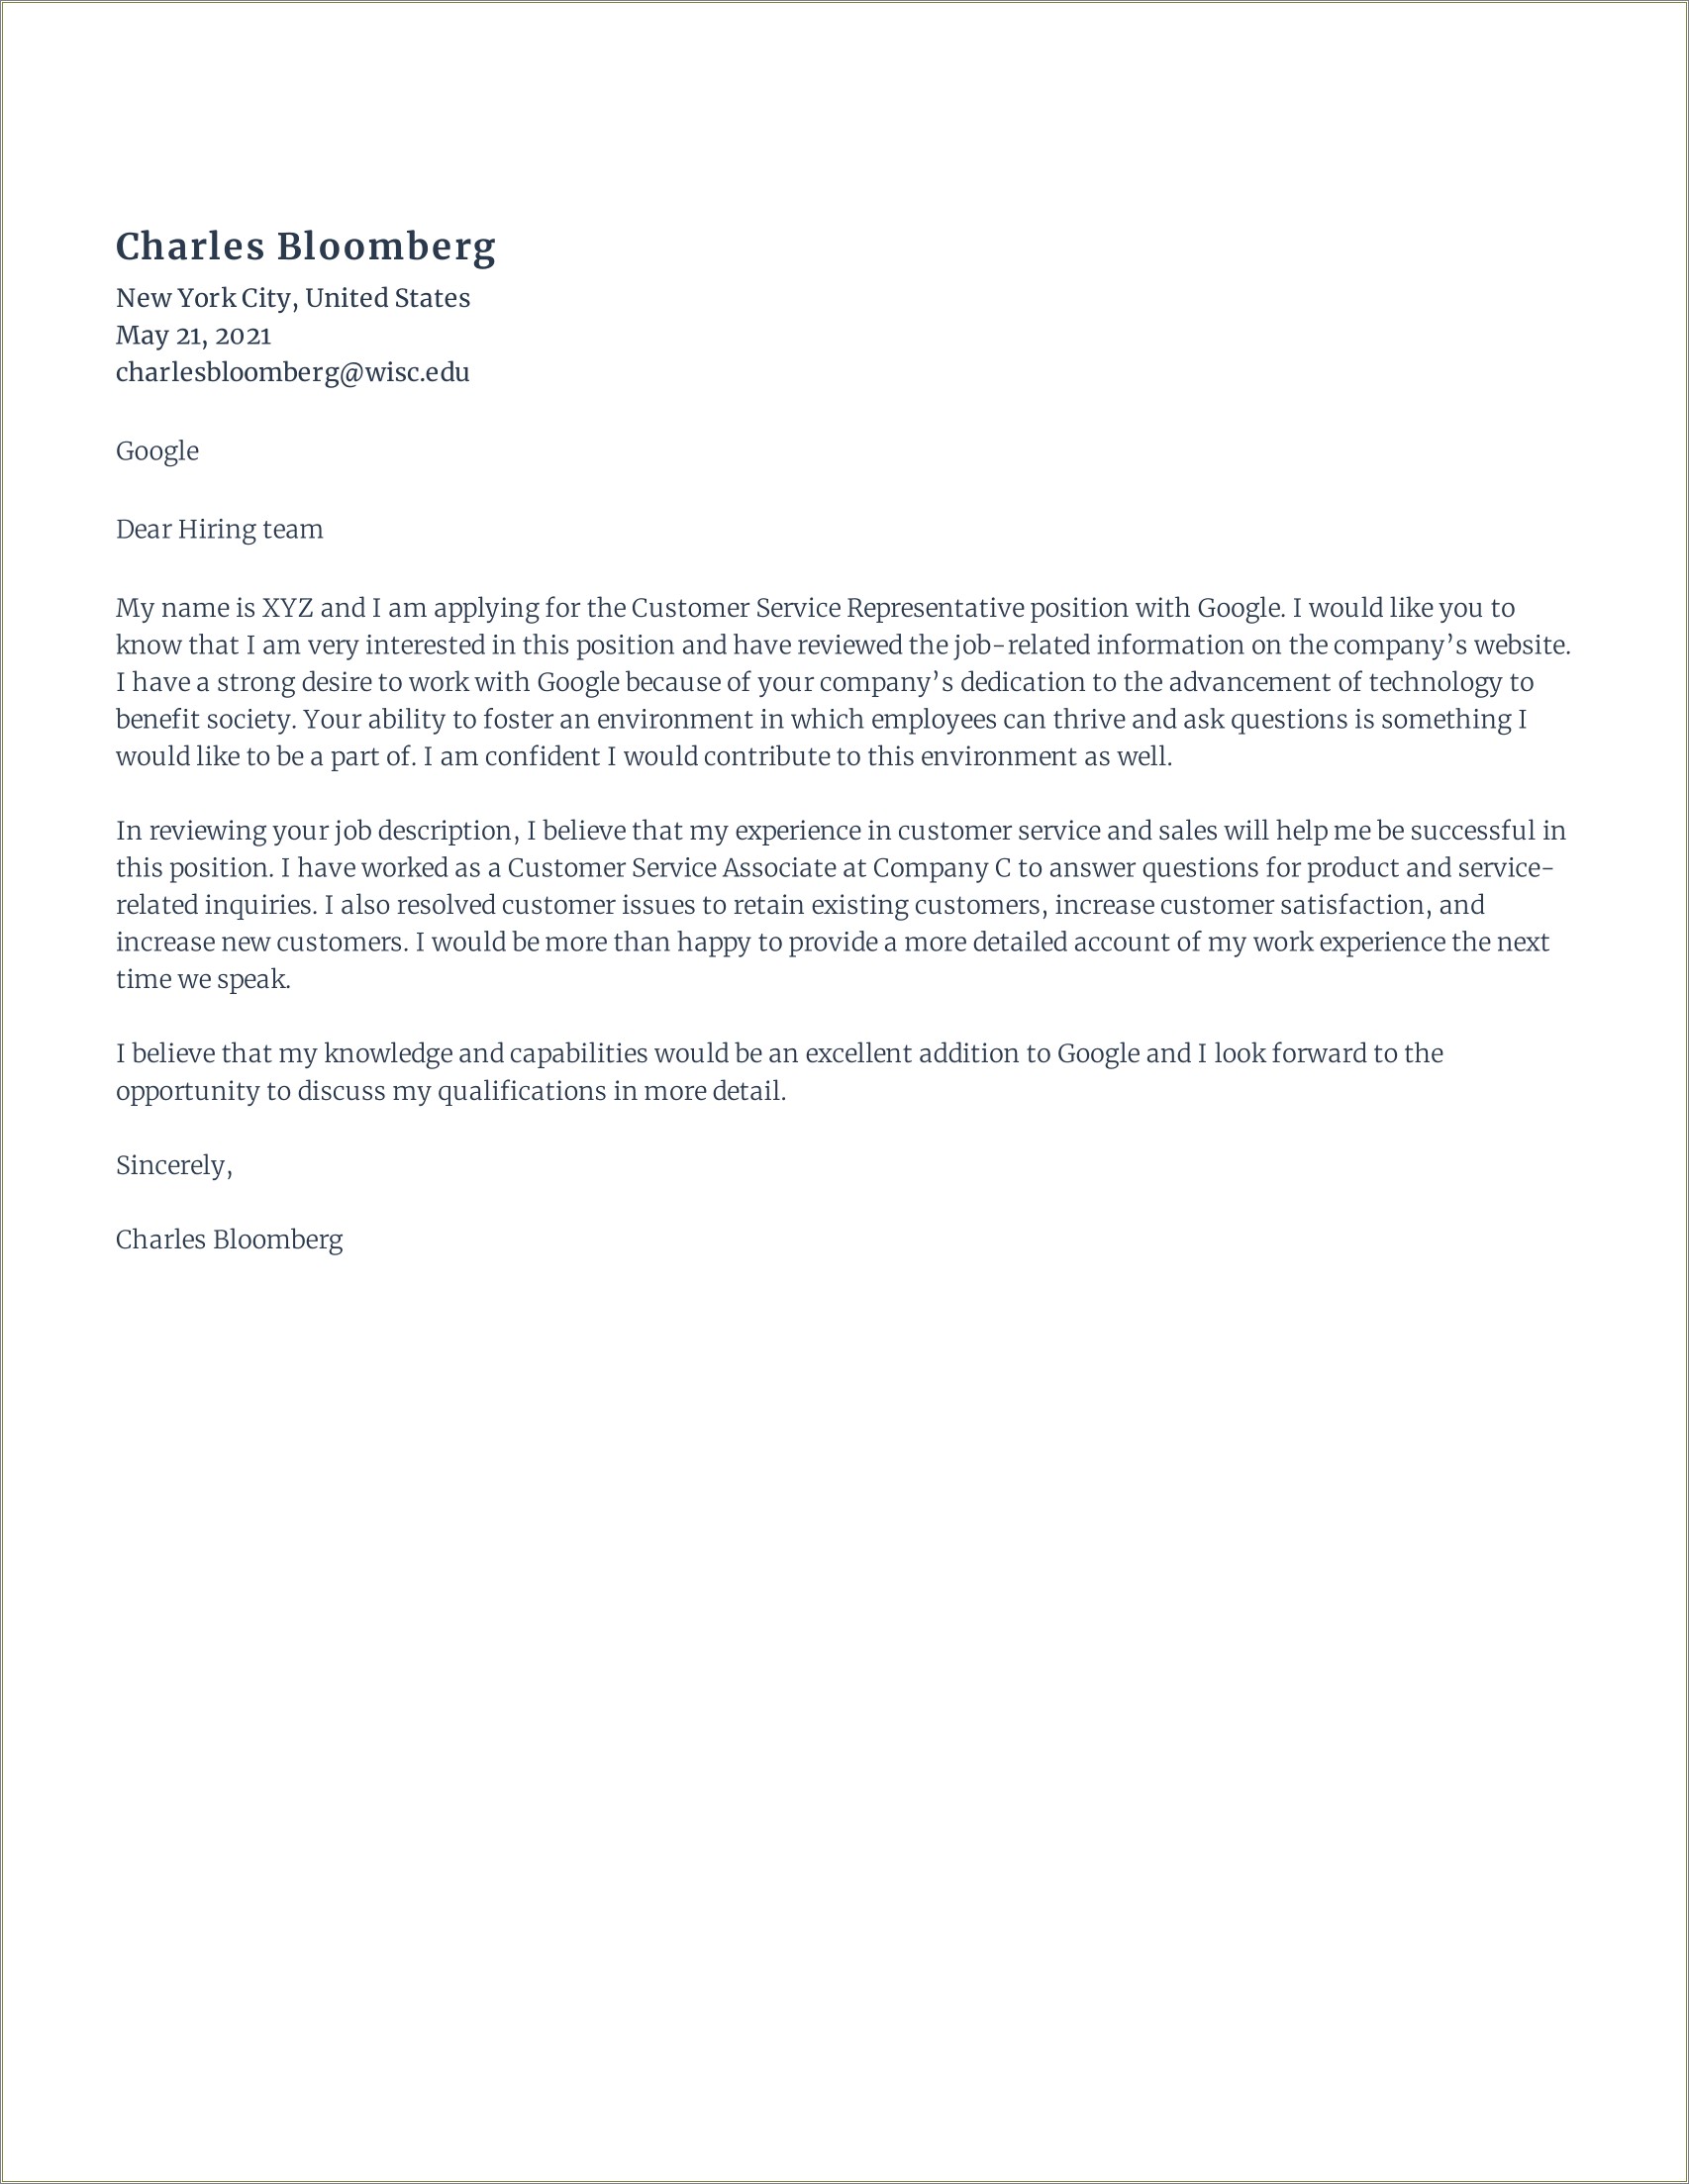 Example Resume Customer Service Cover Letter